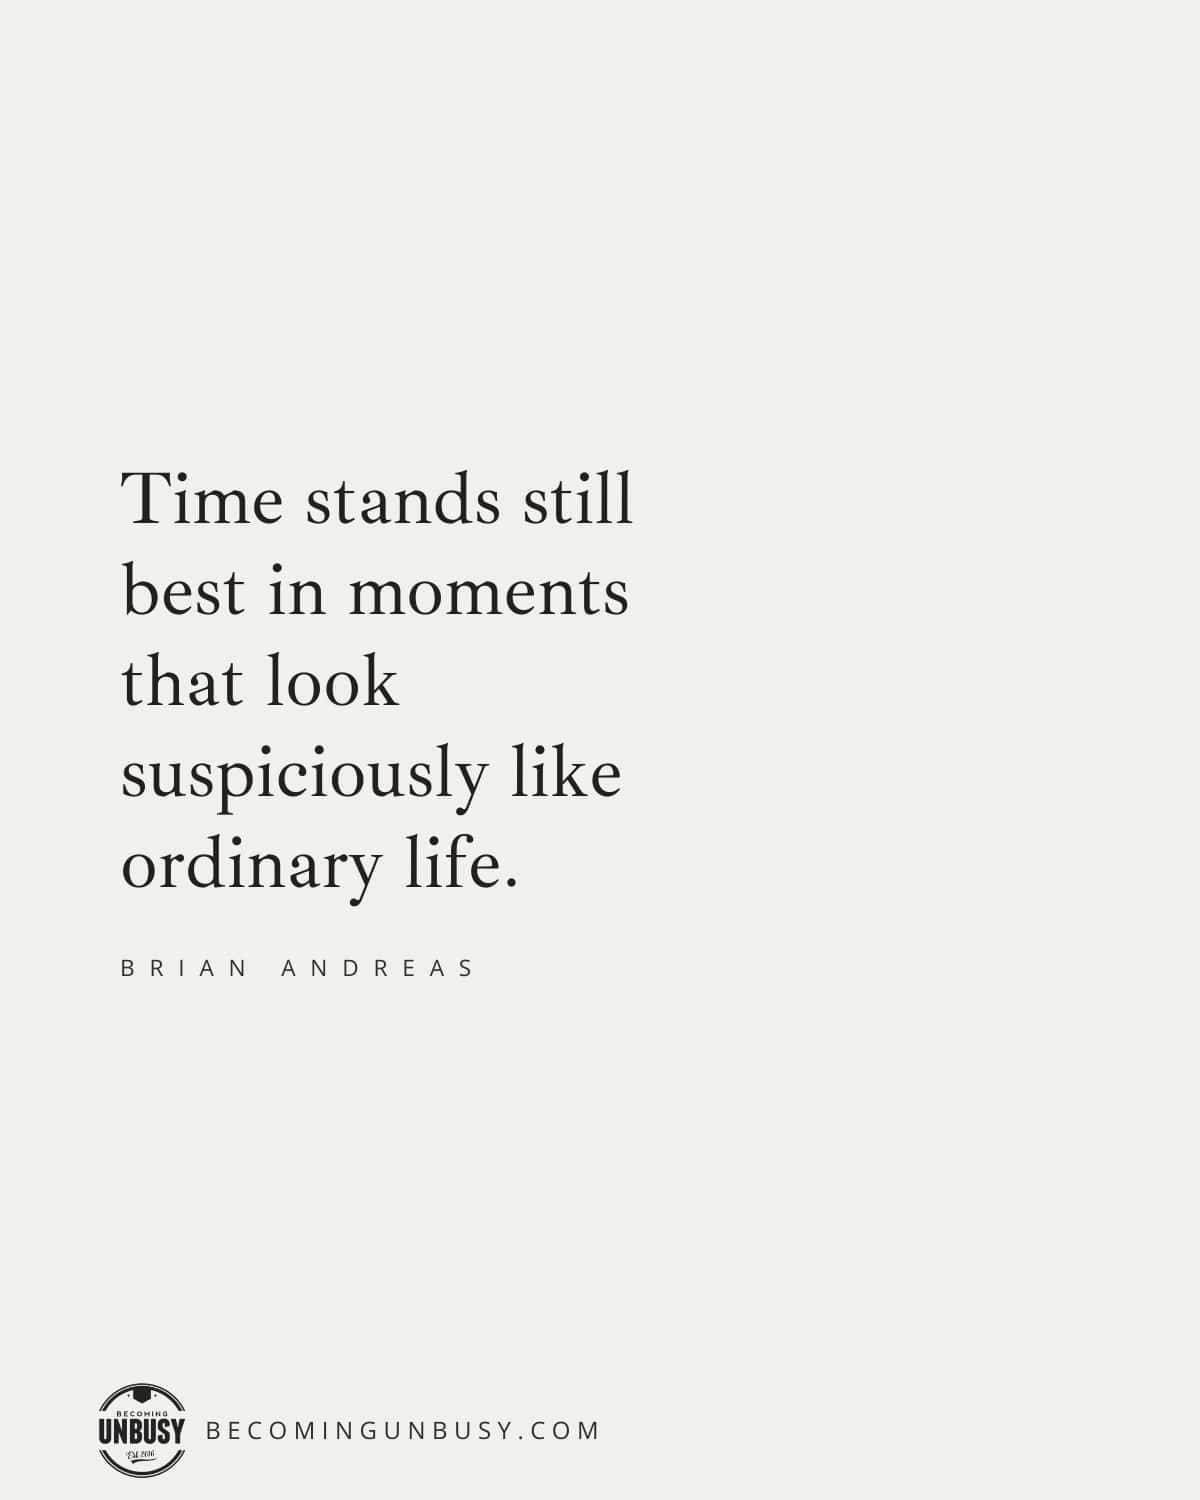 'Time stands still best in moments that look suspiciously like ordinary life.' — Brian Andreas